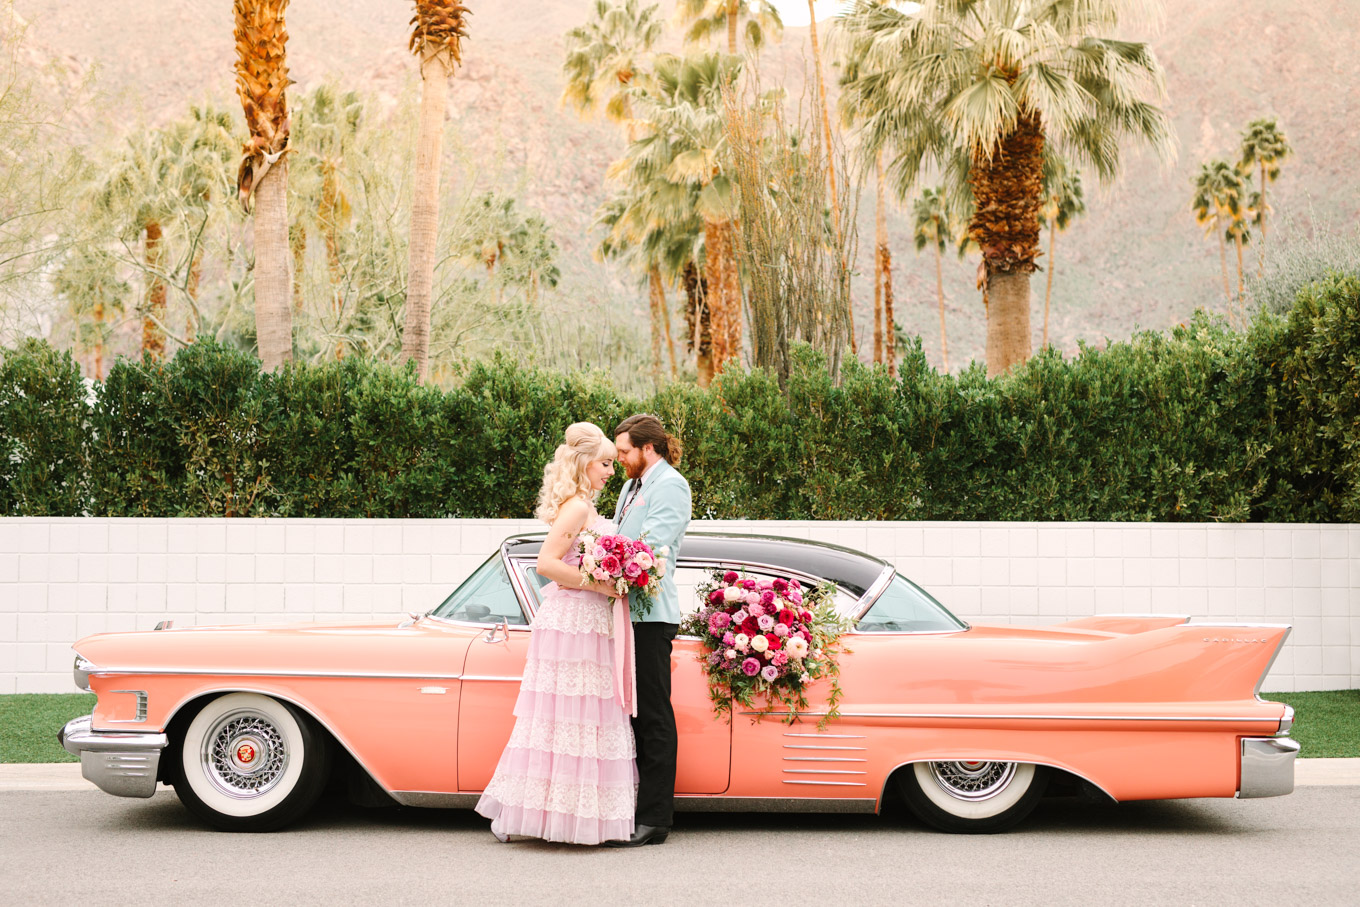 Couple embracing in front of pink classic car. Modern vintage-inspired Palm Springs engagement session with a 1960s pink Cadillac, retro clothing, and flowers by Shindig Chic. | Colorful and elevated wedding inspiration for fun-loving couples in Southern California | #engagementsession #PalmSpringsengagement #vintageweddingdress #floralcar #pinkcar   Source: Mary Costa Photography | Los Angeles